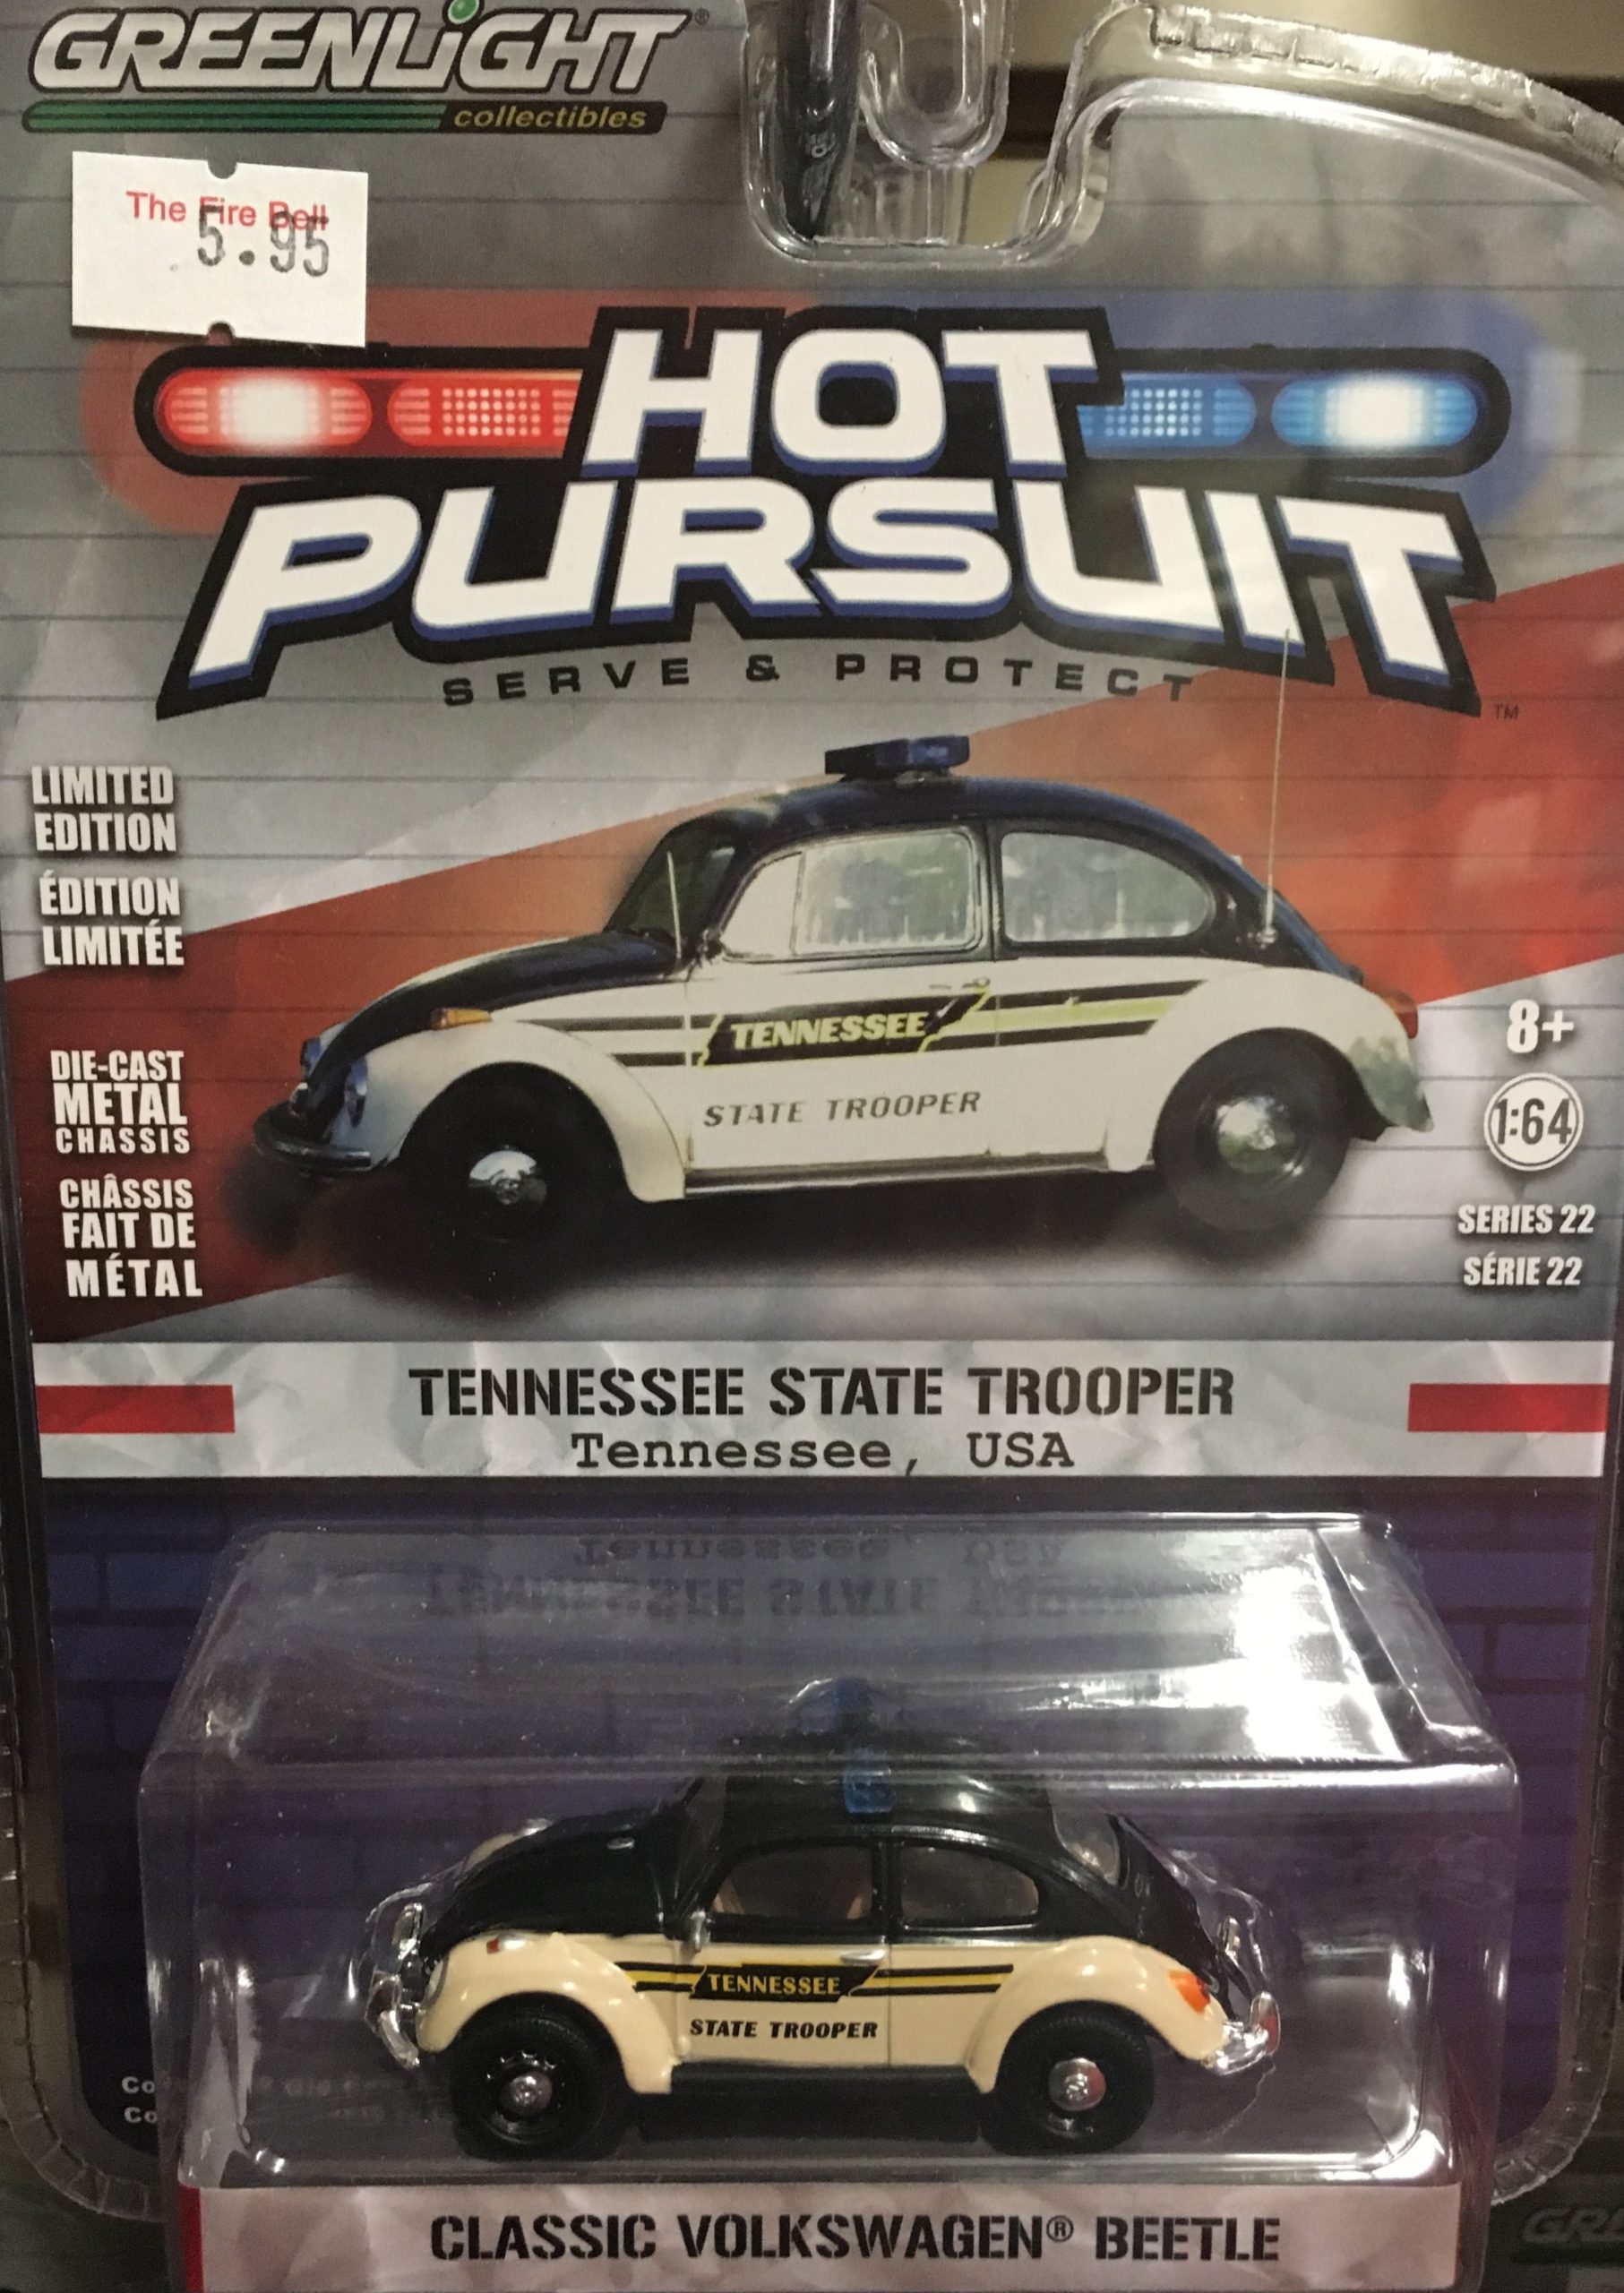 Volks Wagon Beetle, Tennessee State Trooper. 1:64th Scale